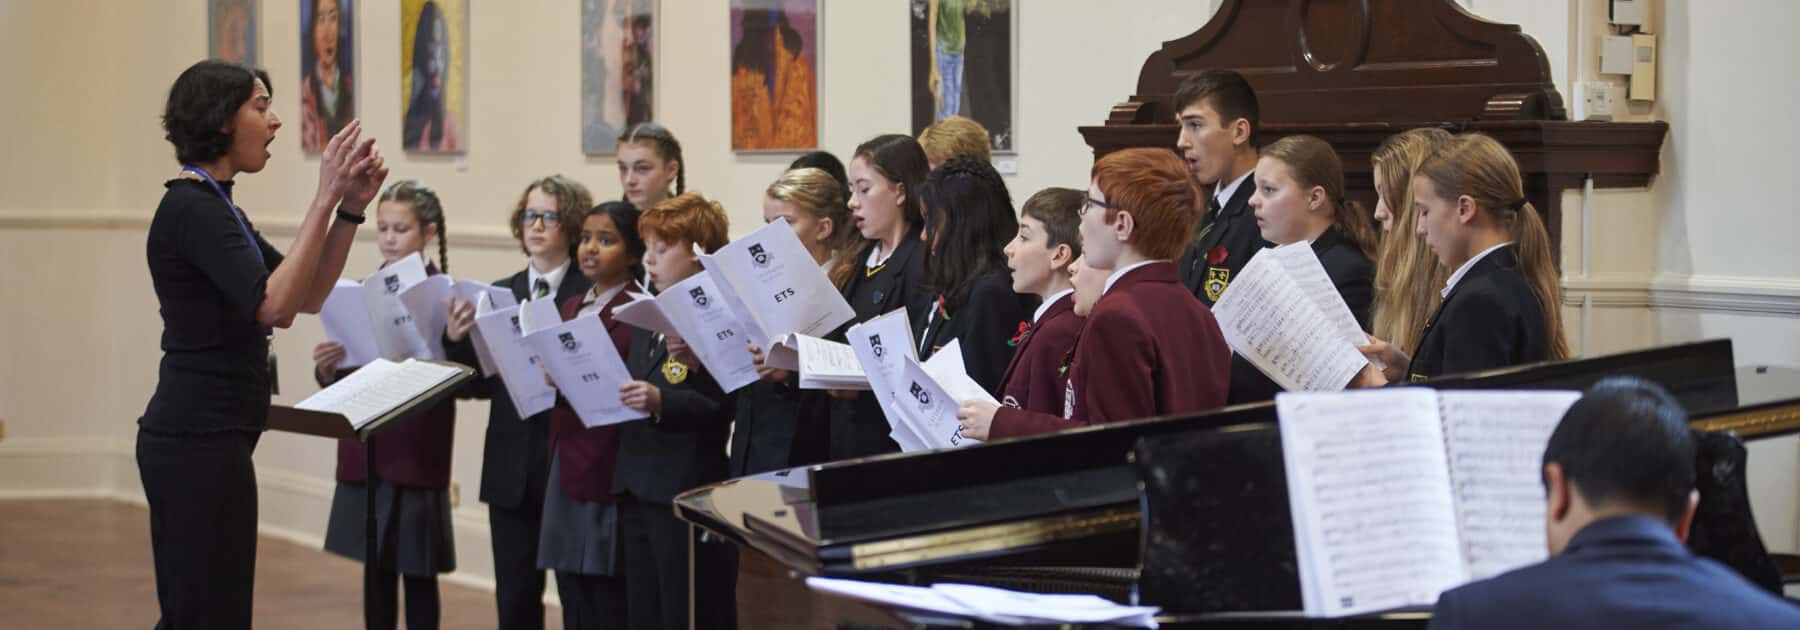 Choirs perform a moving Recital for Remembrance Sunday